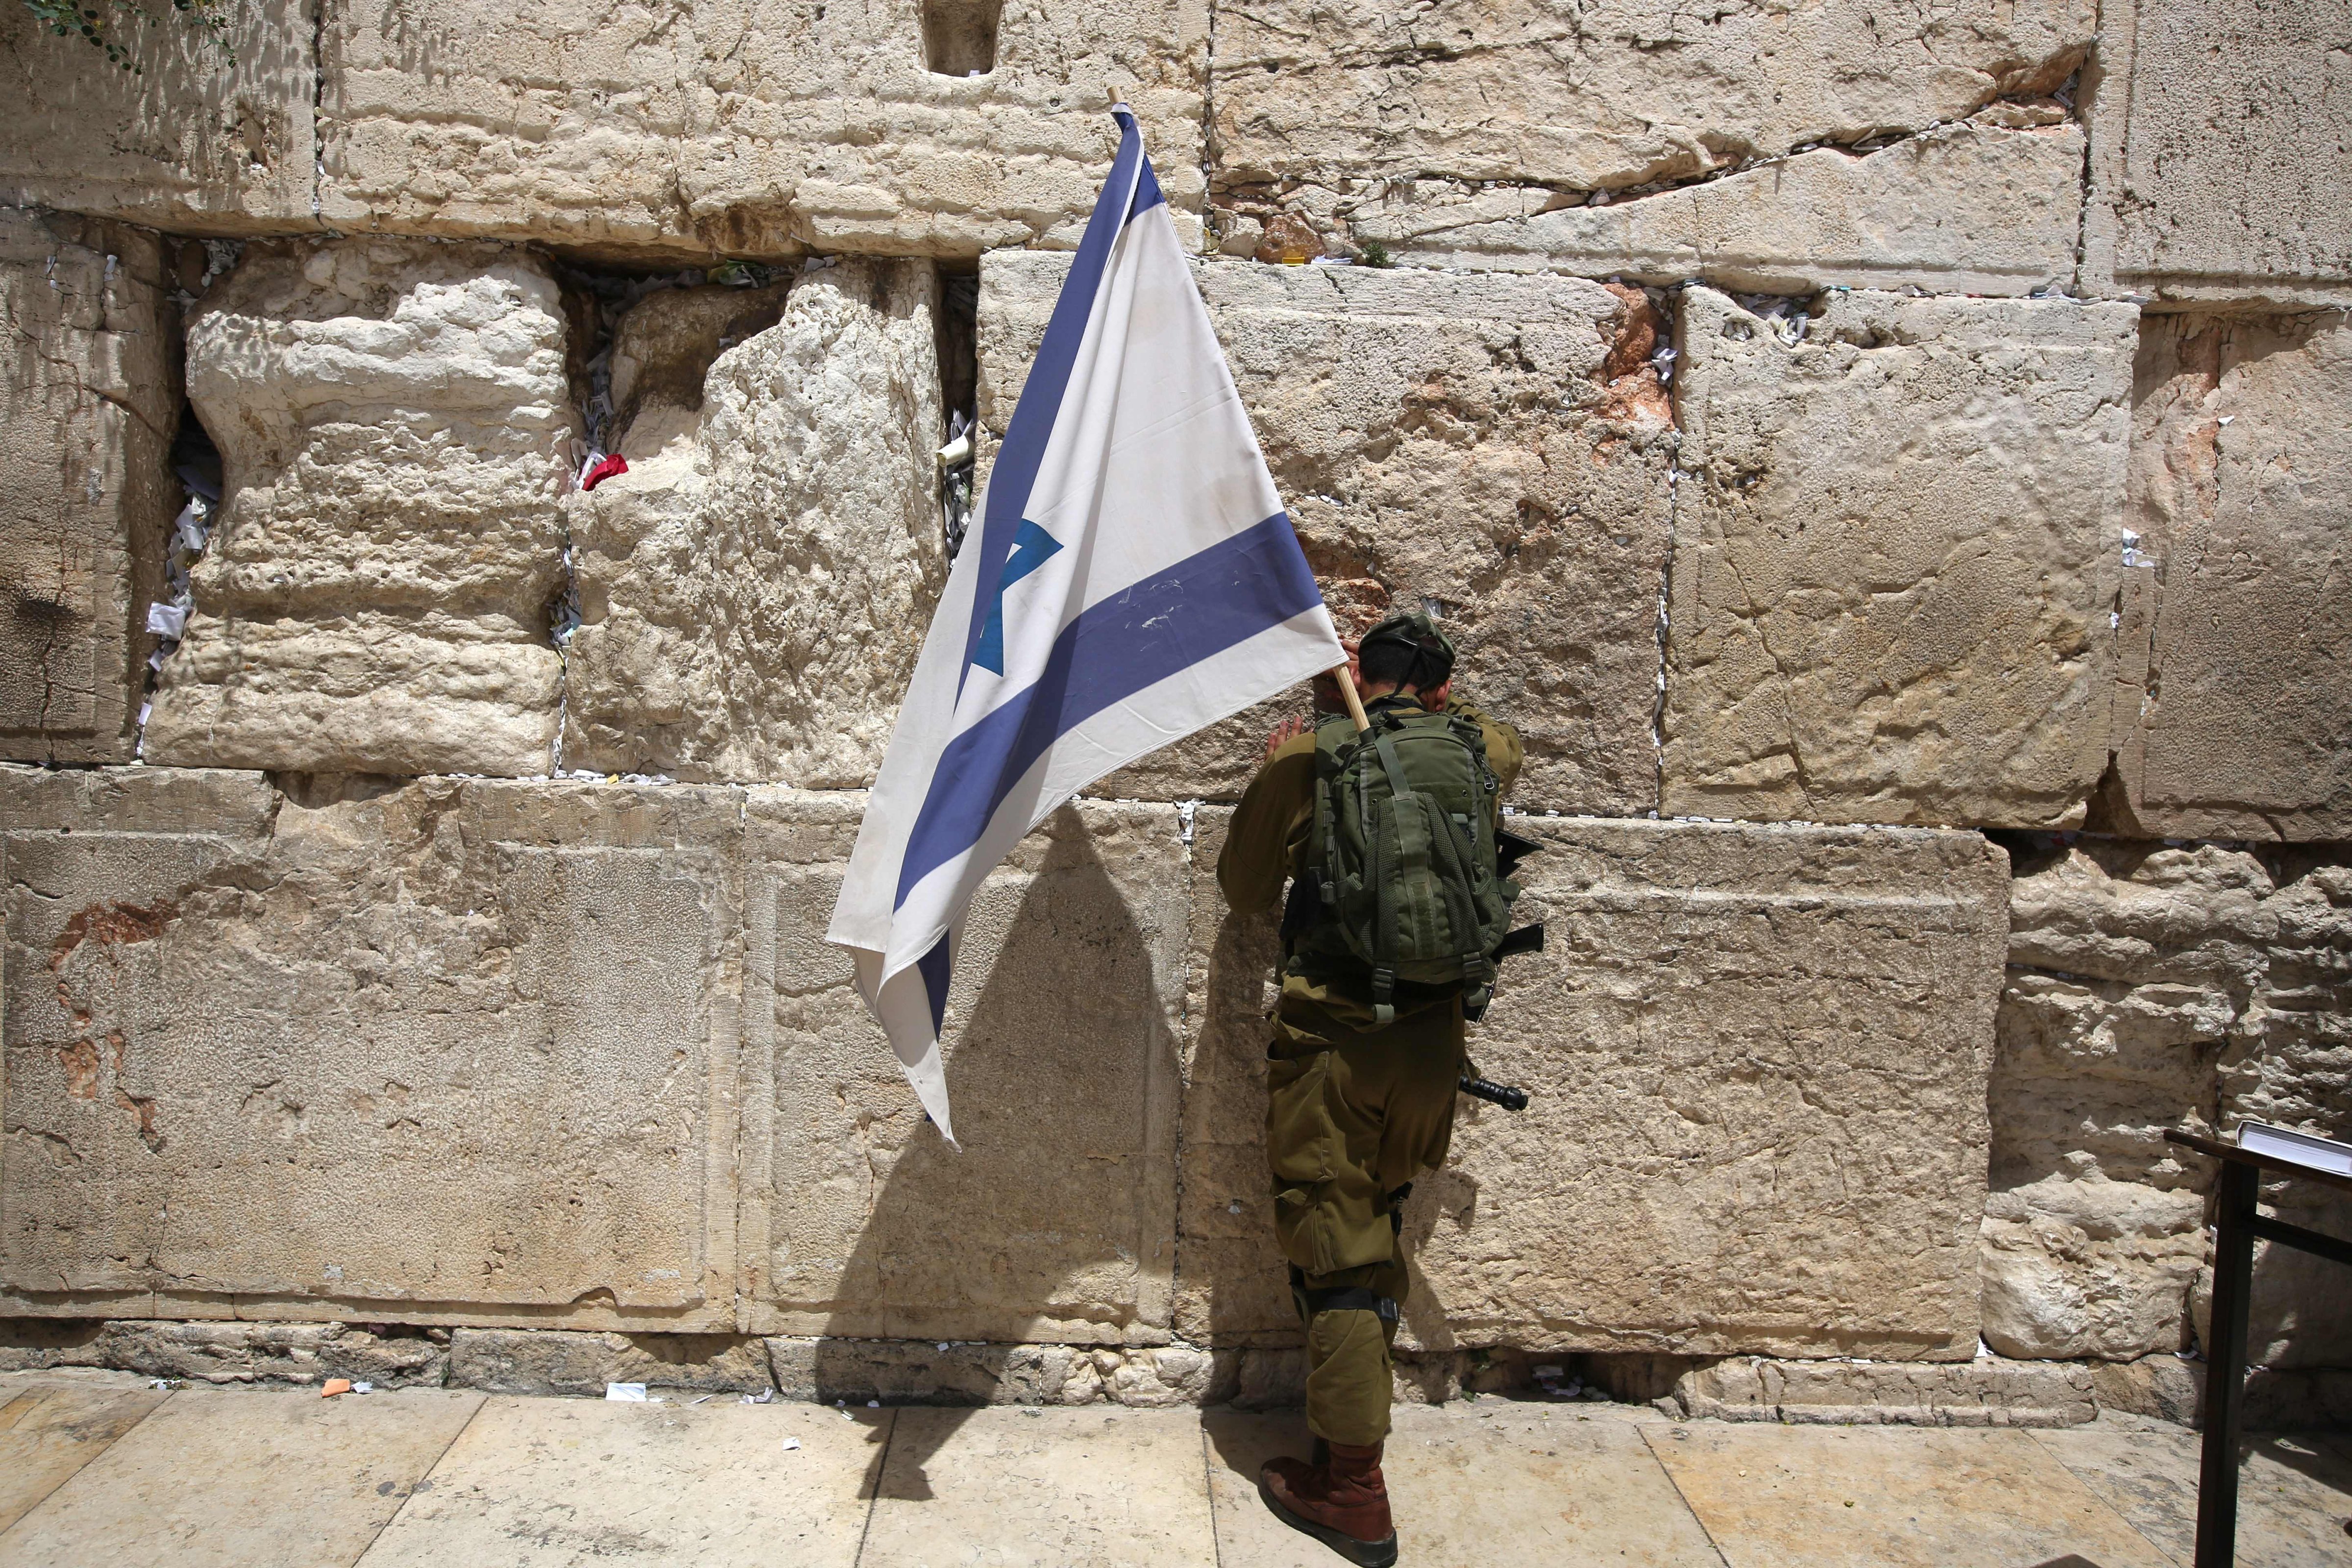 An Israeli soldier prays at the Western Wall with a national flag on June 5, 2016 in Jerusalem's old city, as Israelis celebrate Jerusalem Day. (MENAHEM KAHANA&mdash;AFP/Getty Images)